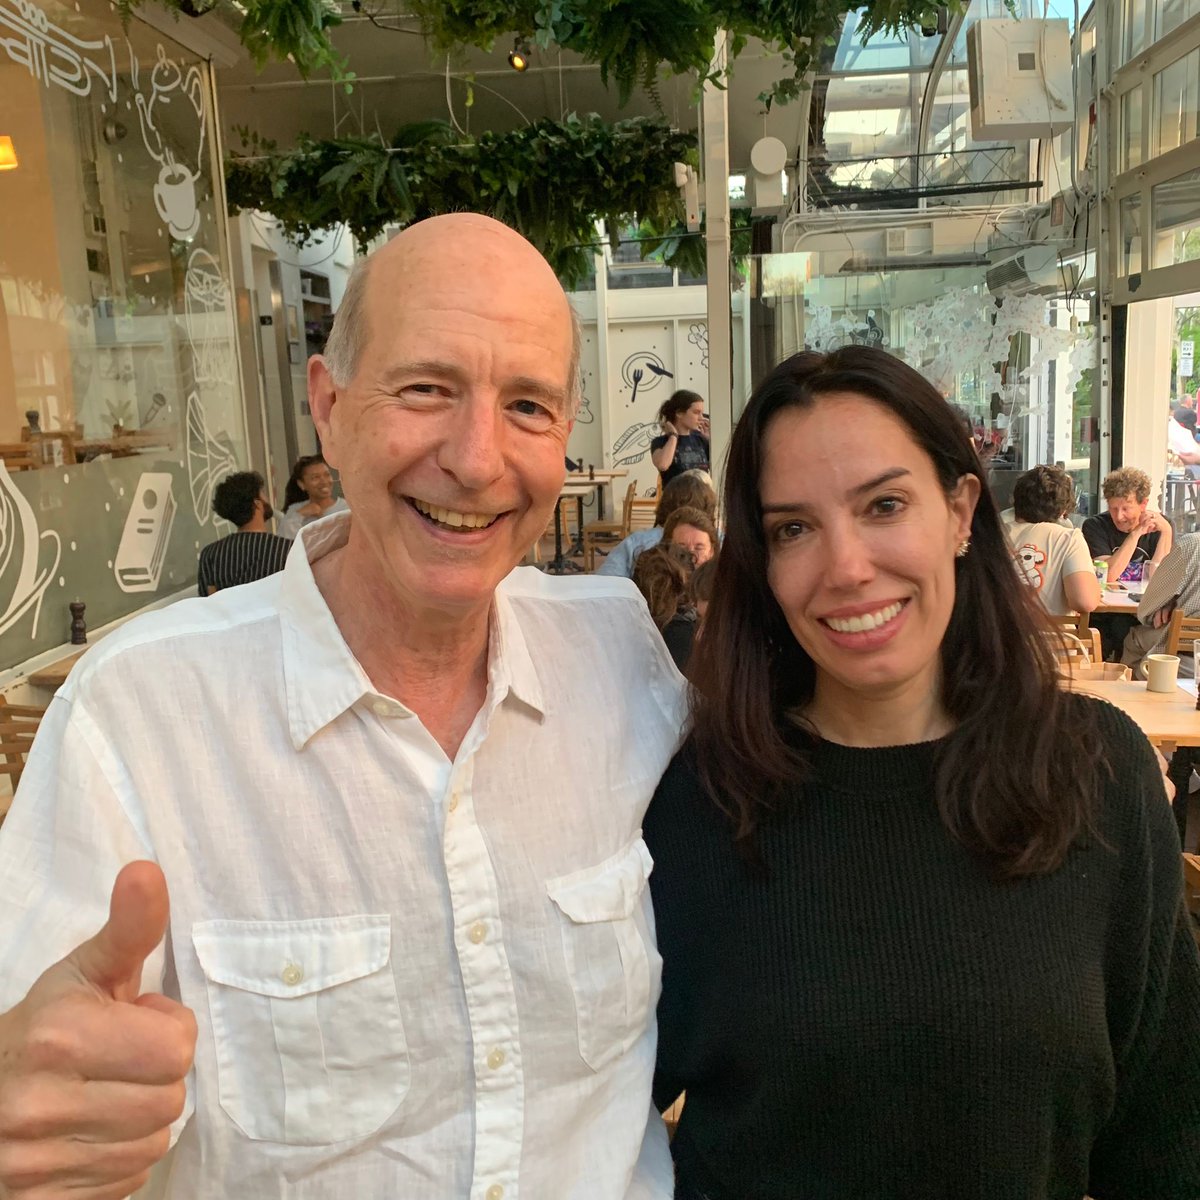 Co-editors Tom Palley and Julia Braga, ahead of the IMF/World Bank Spring meetings in DC